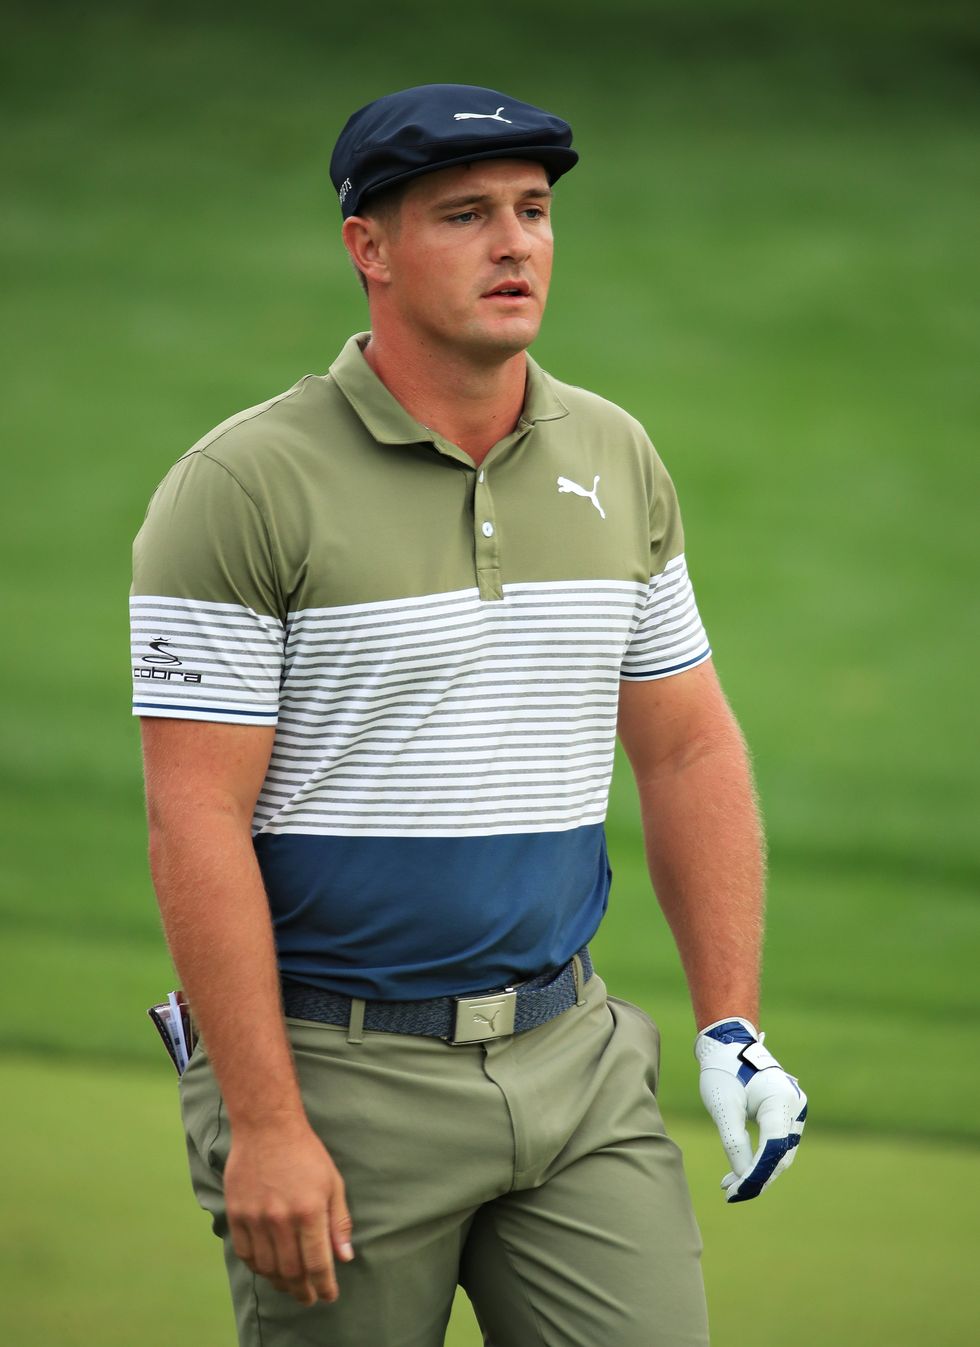 dubai, united arab emirates january 24 bryson dechambeau of united states walks on the sixteenth fairway during day two of the omega dubai desert classic at emirates golf club on january 24, 2020 in dubai, united arab emirates photo by andrew redingtongetty images